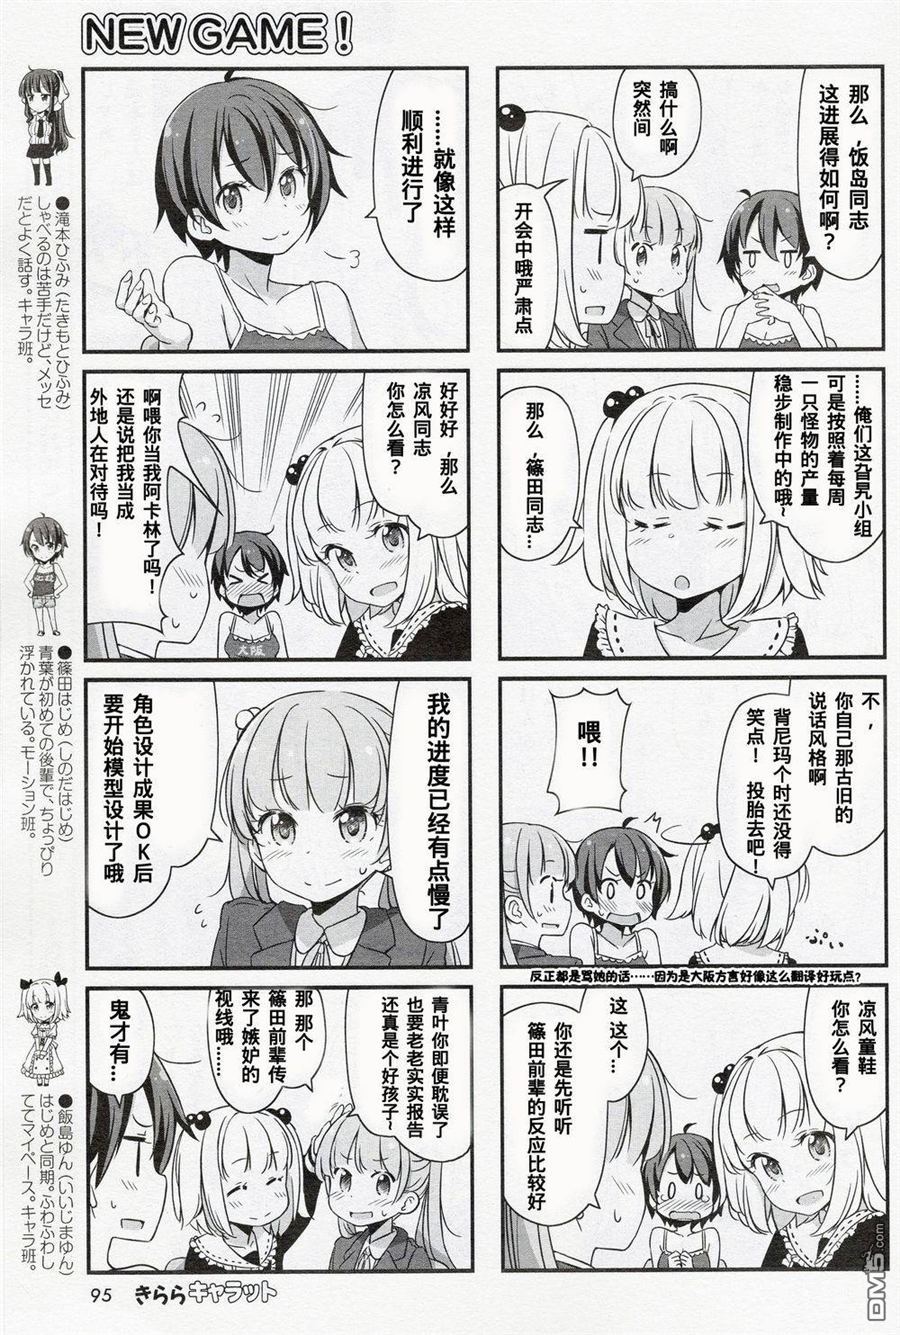 《New Game!》漫画 New Game 11-12集